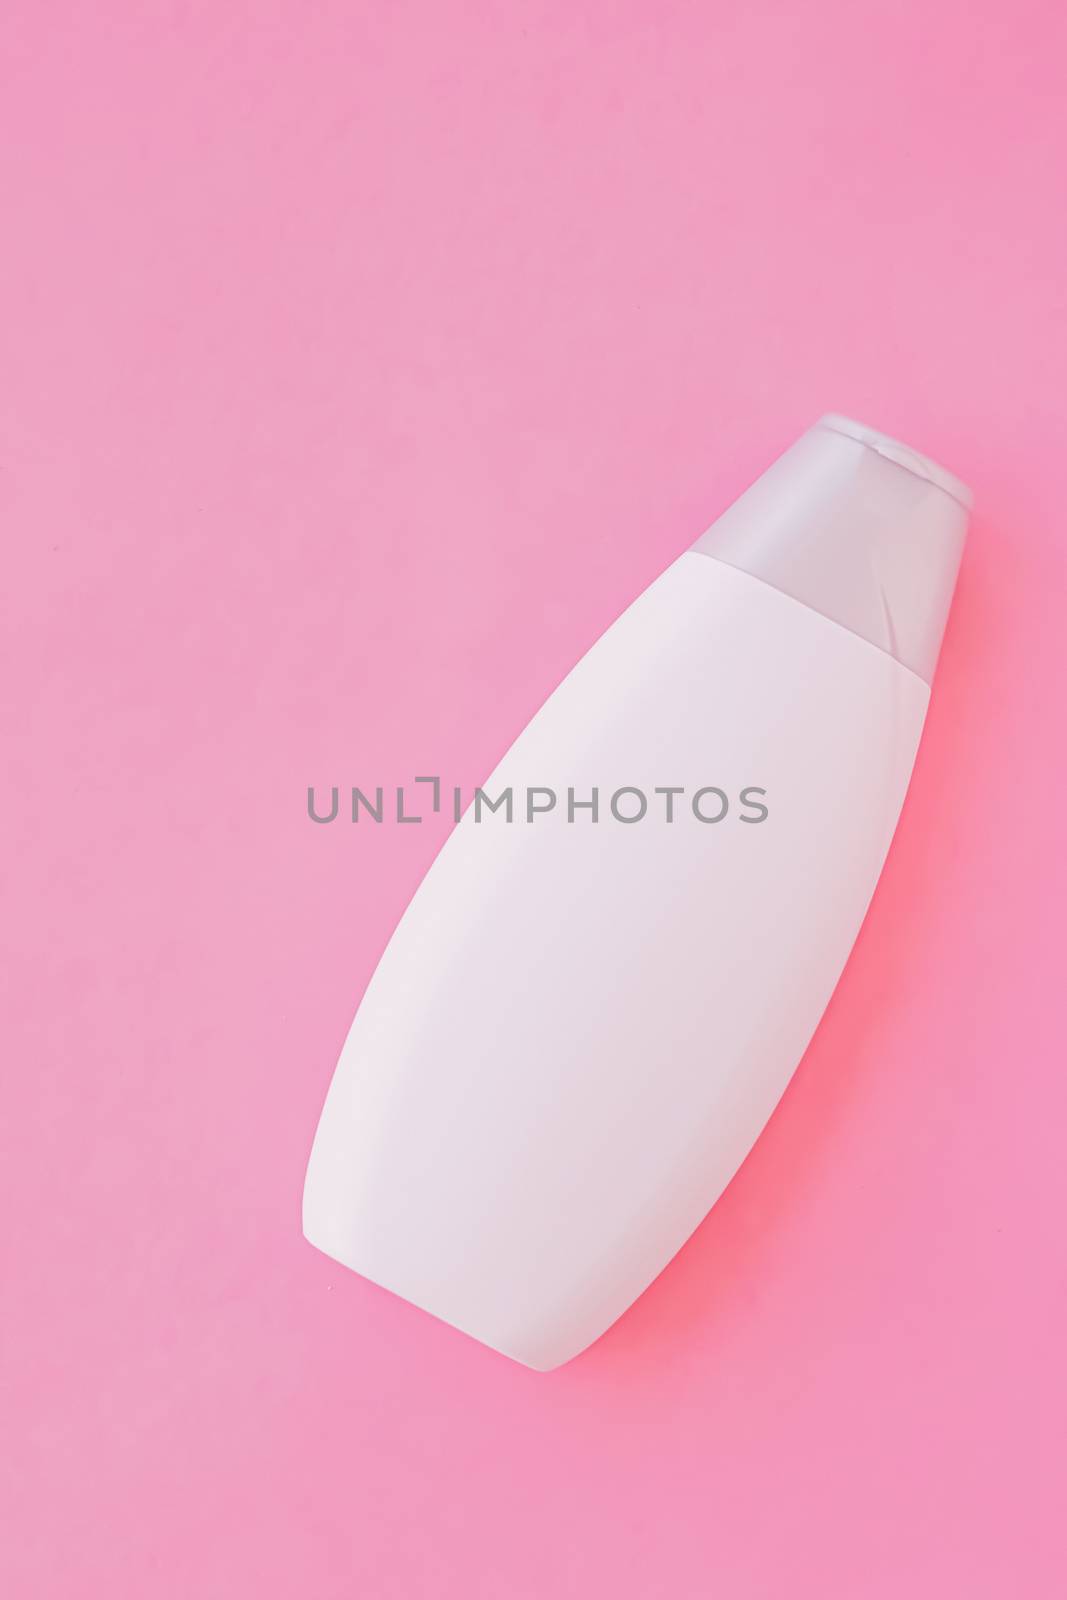 Blank label shampoo bottle or shower gel on pink background, beauty product and body care cosmetics, flatlay